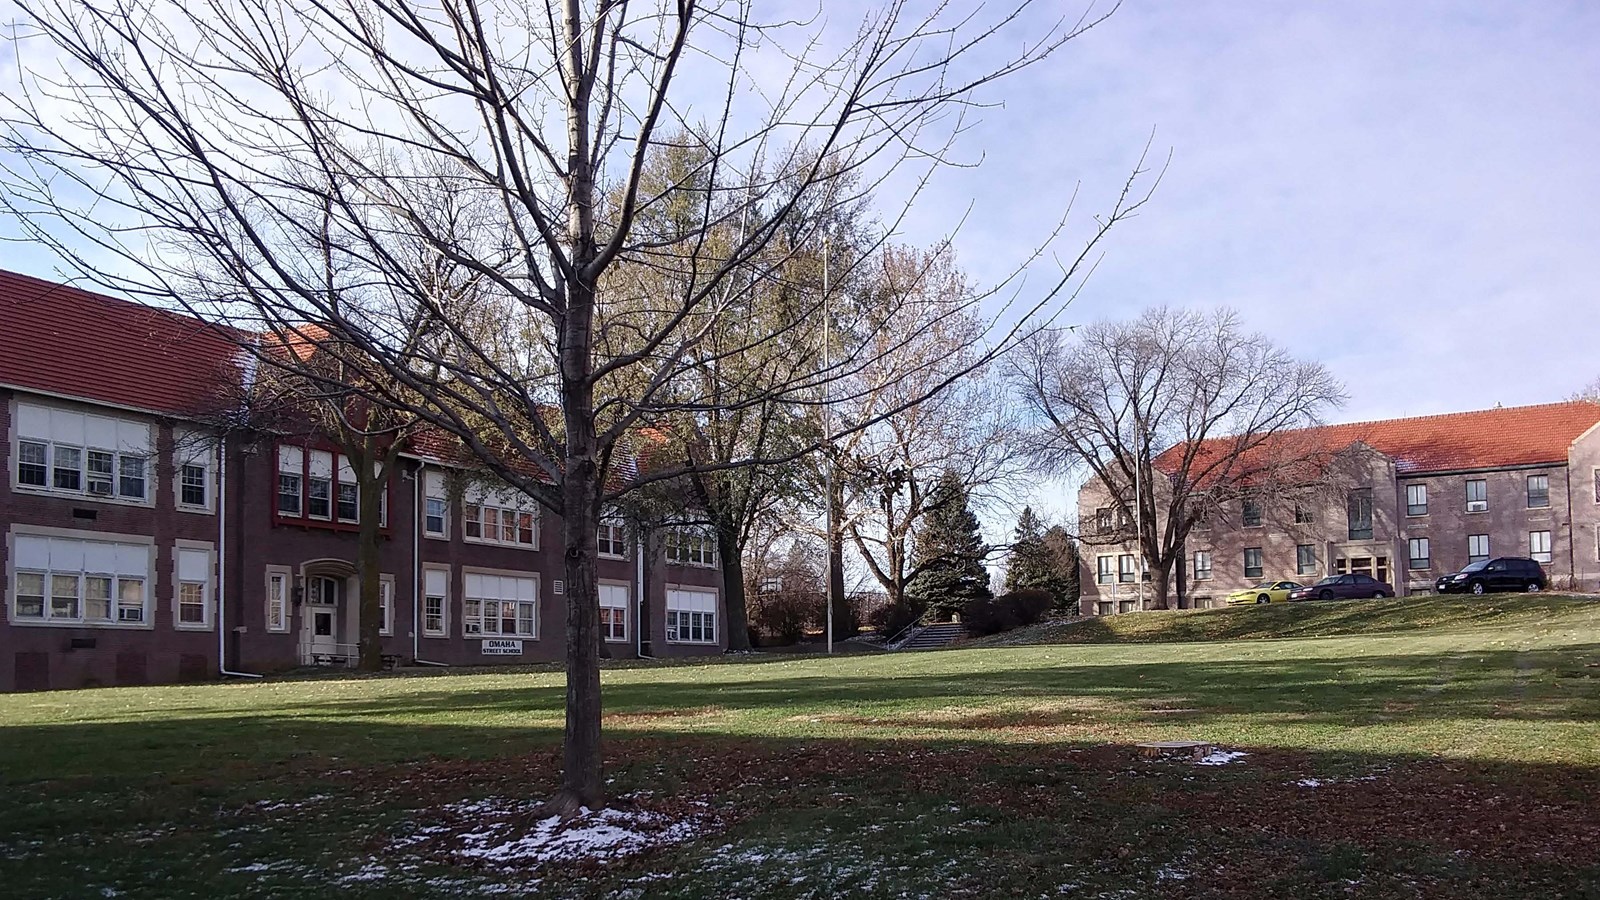 Quad of the campus showing buildings on two sides of an open green area